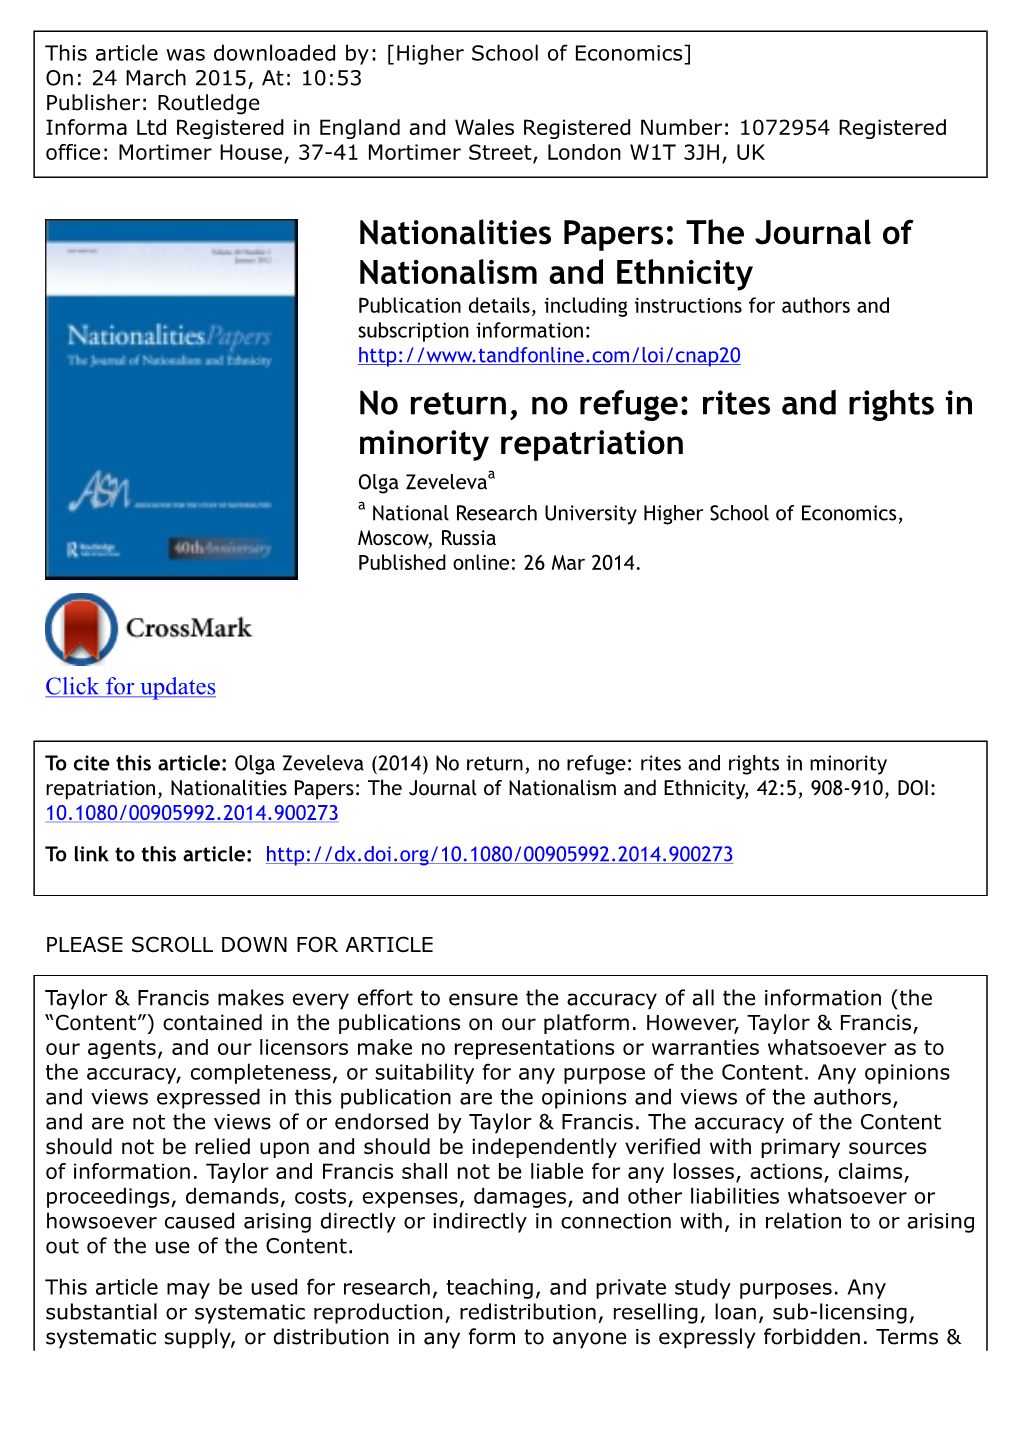 Nationalities Papers: the Journal of Nationalism and Ethnicity No Return